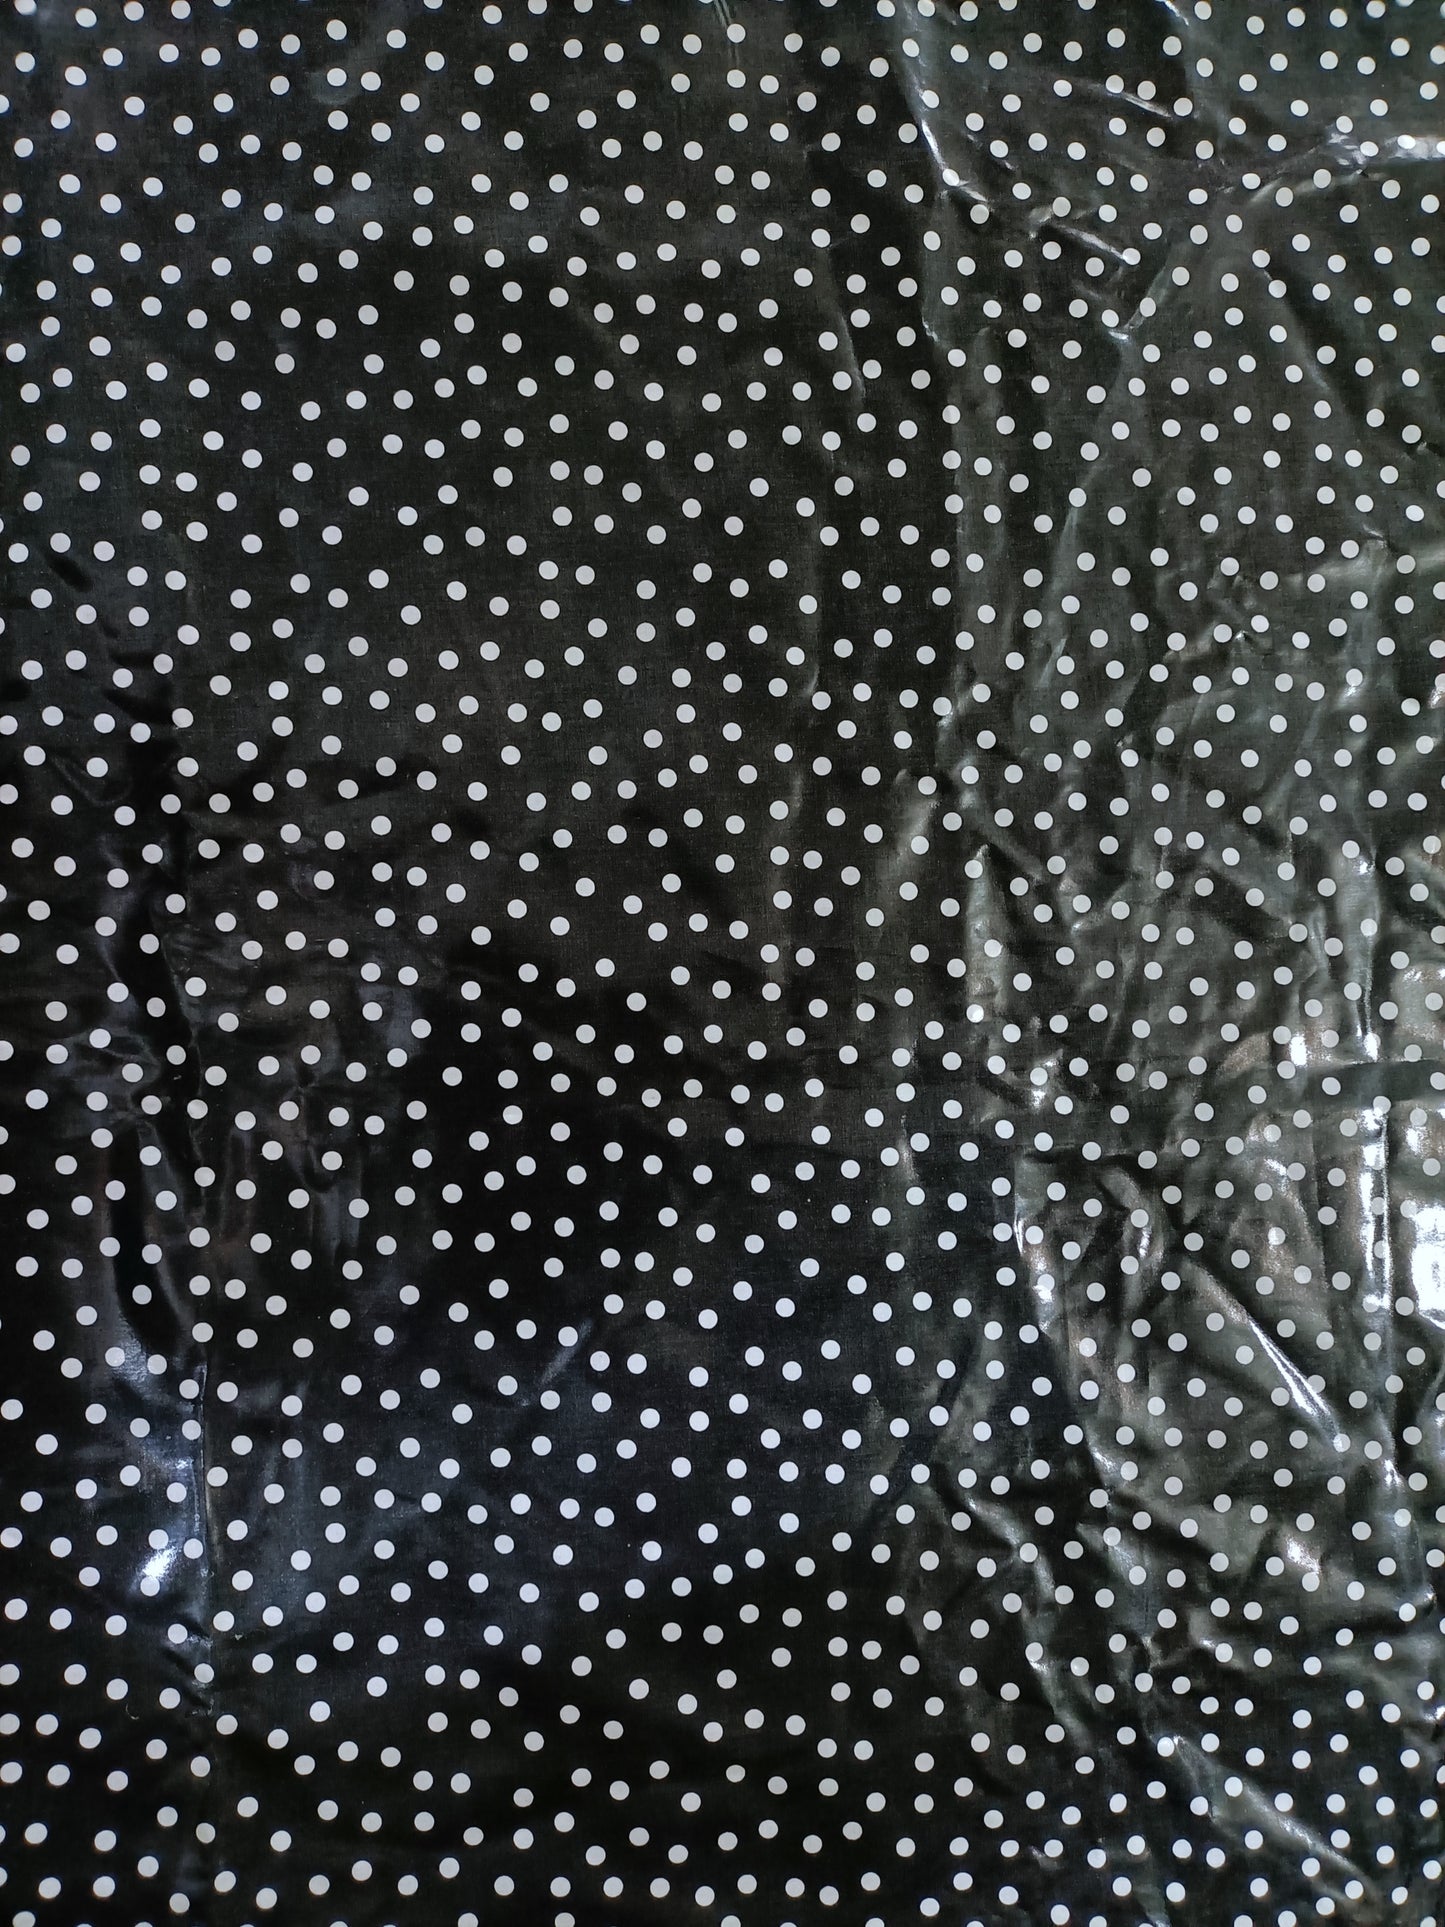 Laminated Cotton - Black with White Dots - Fabric Rescue